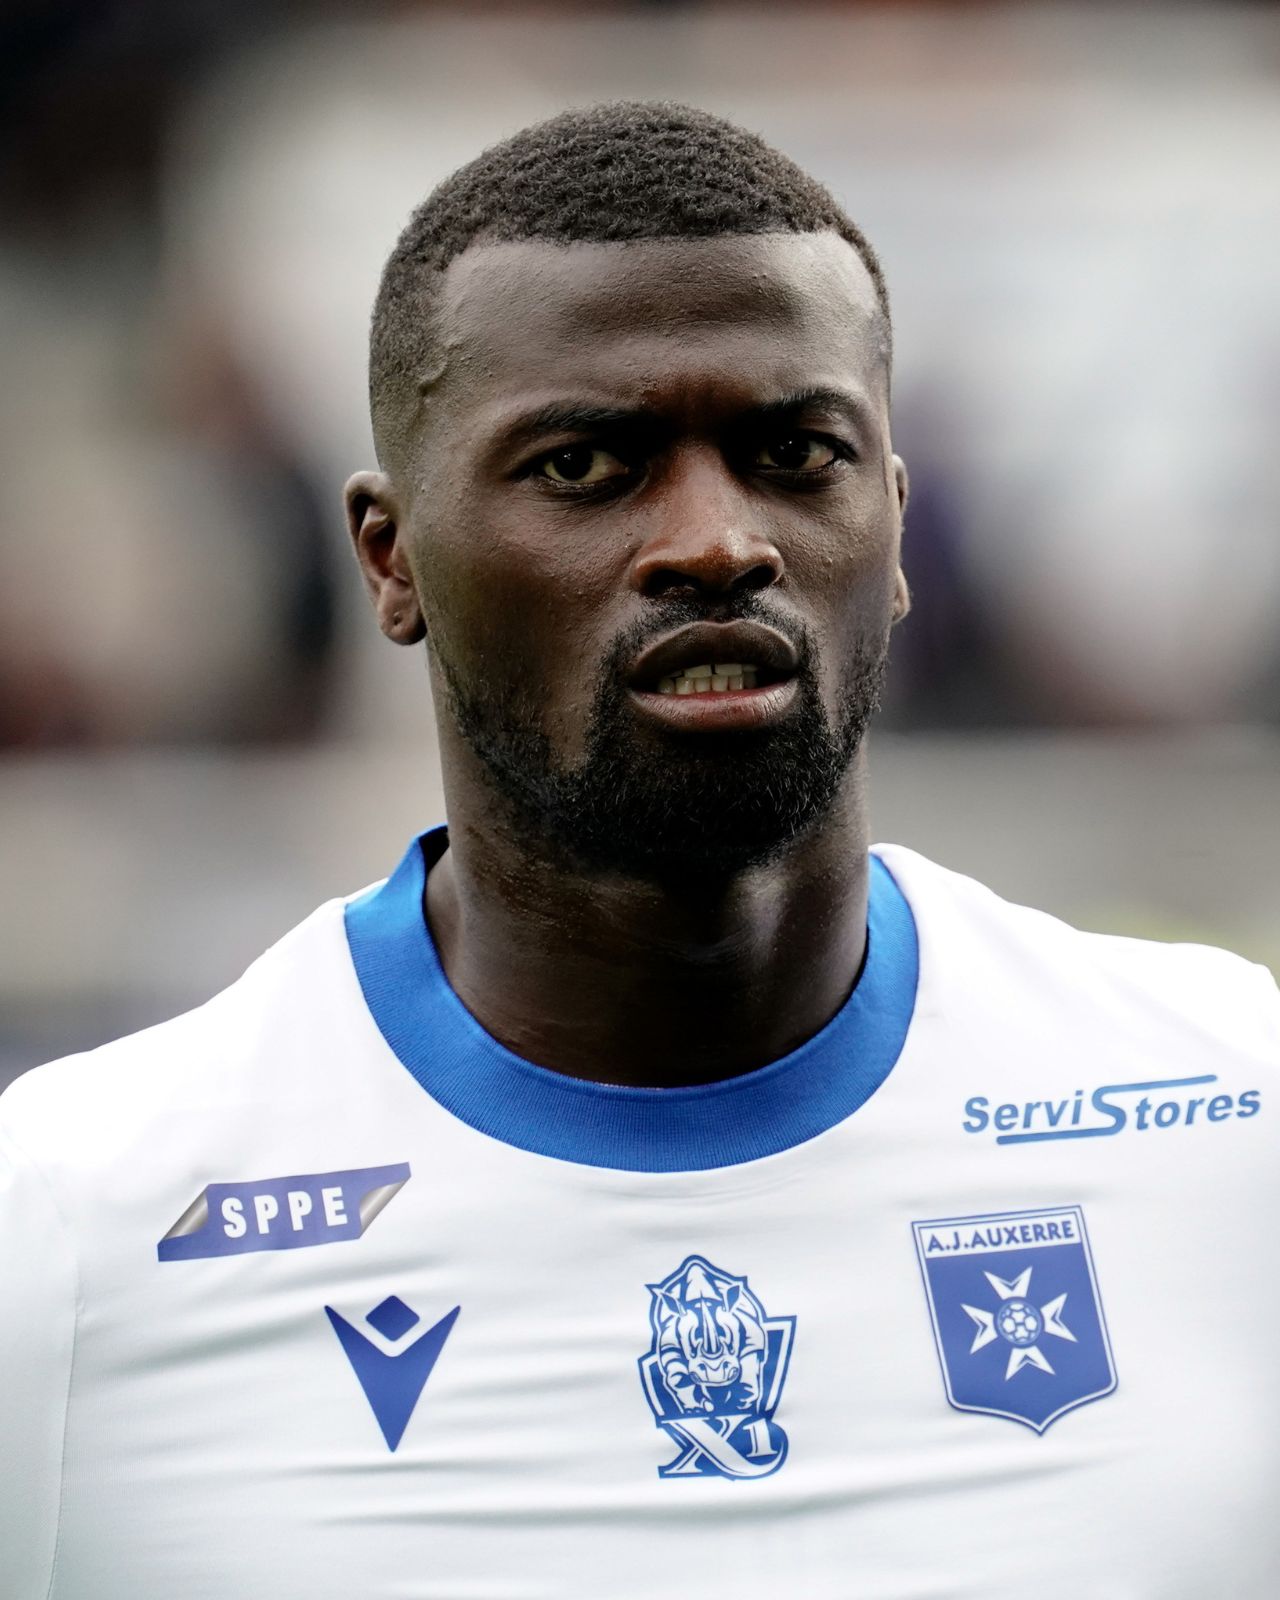 Mbaye Niang (AJ Auxerre).